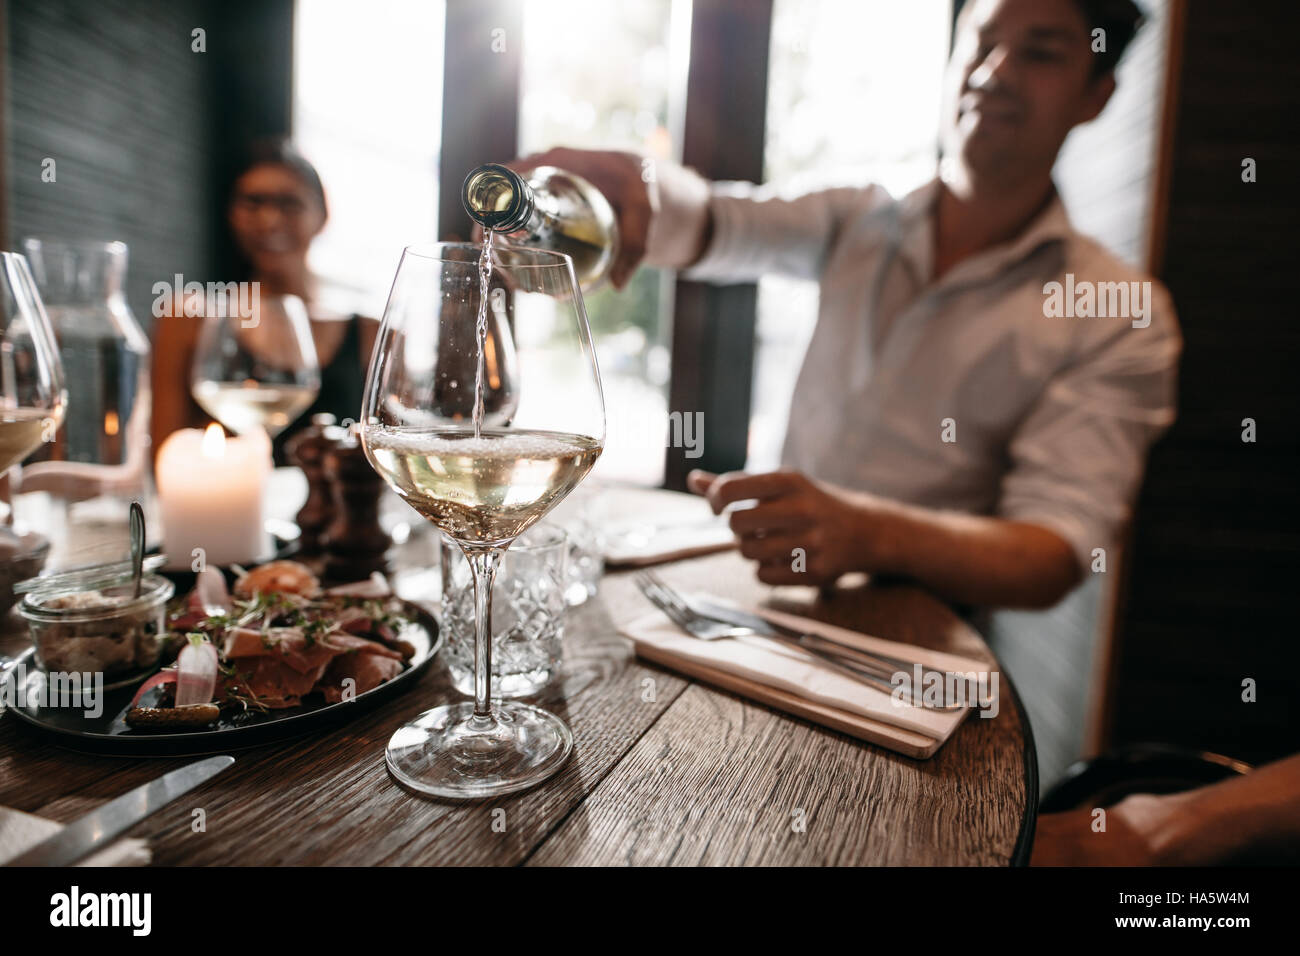 Young man pouring wine from the bottle into a glass with friends sitting around the table. Young people having wine at restaurant. Stock Photo